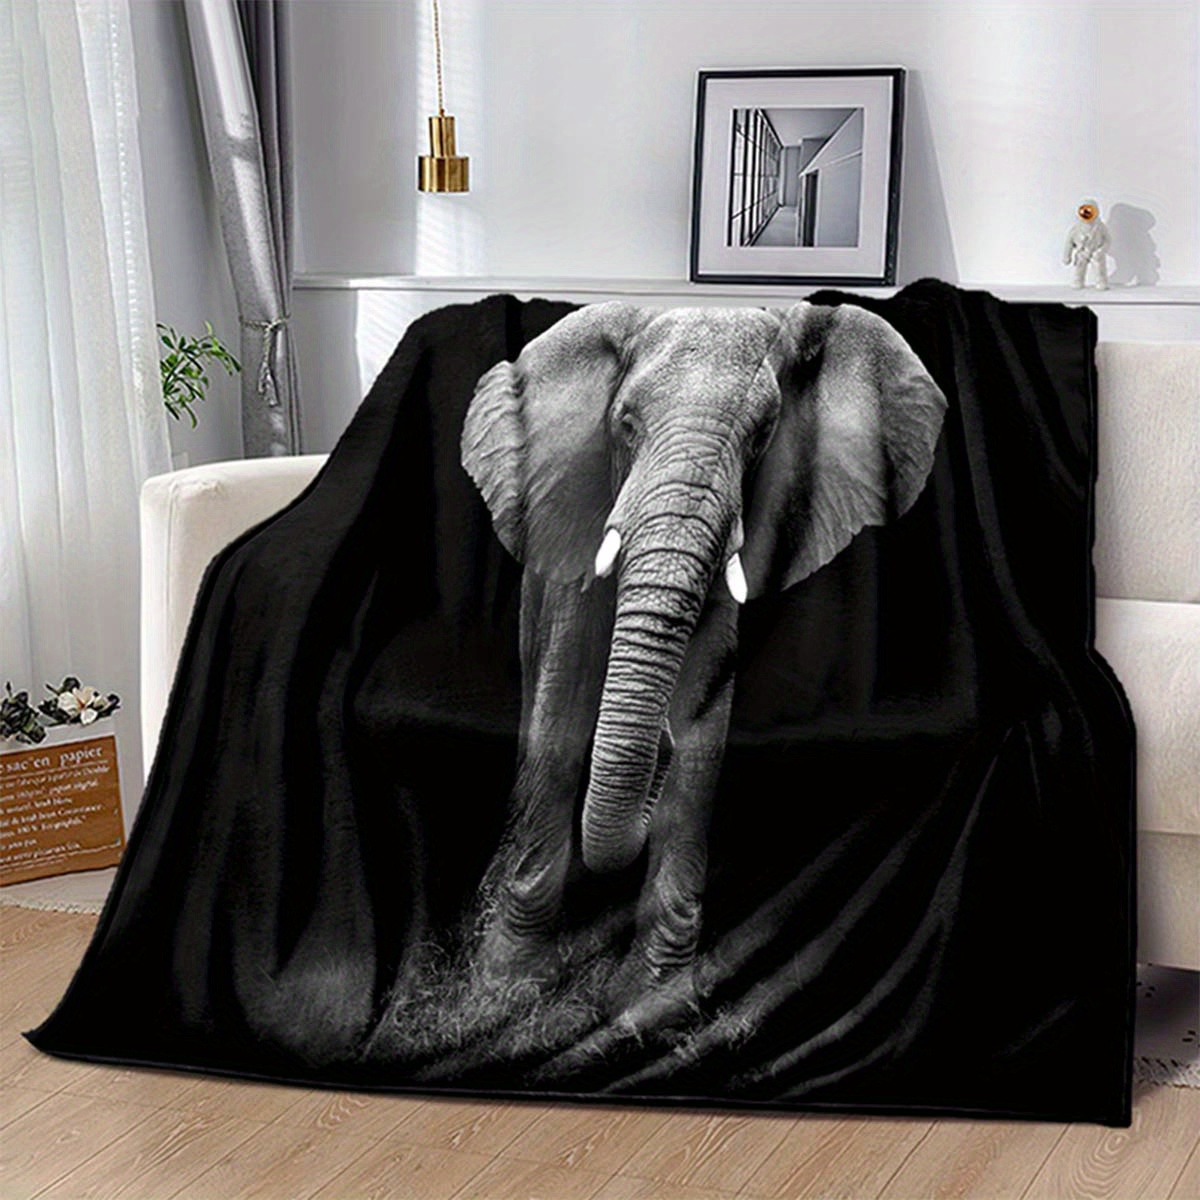 

3d Elephant Soft Flannel Throw Blanket For Living Room Bedroom Bed Sofa Picnic Cover Decor Napping Couch Chair Cover